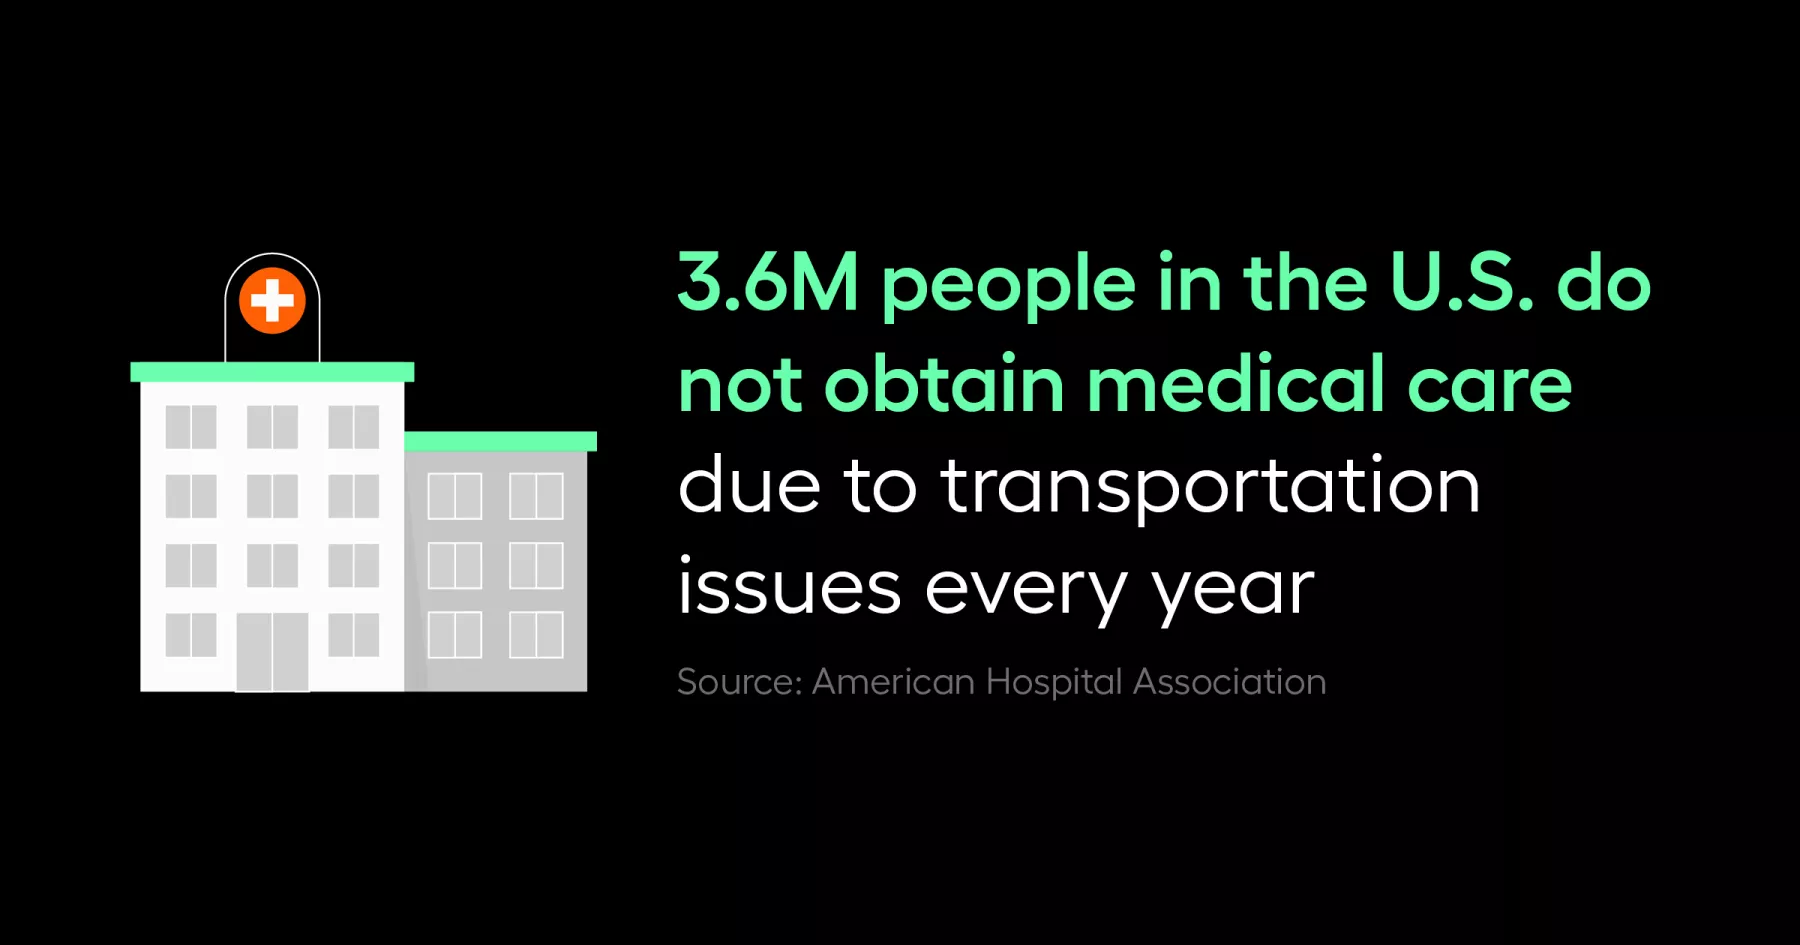 Every year, 3.6M people do not obtain healthcare due to transportation